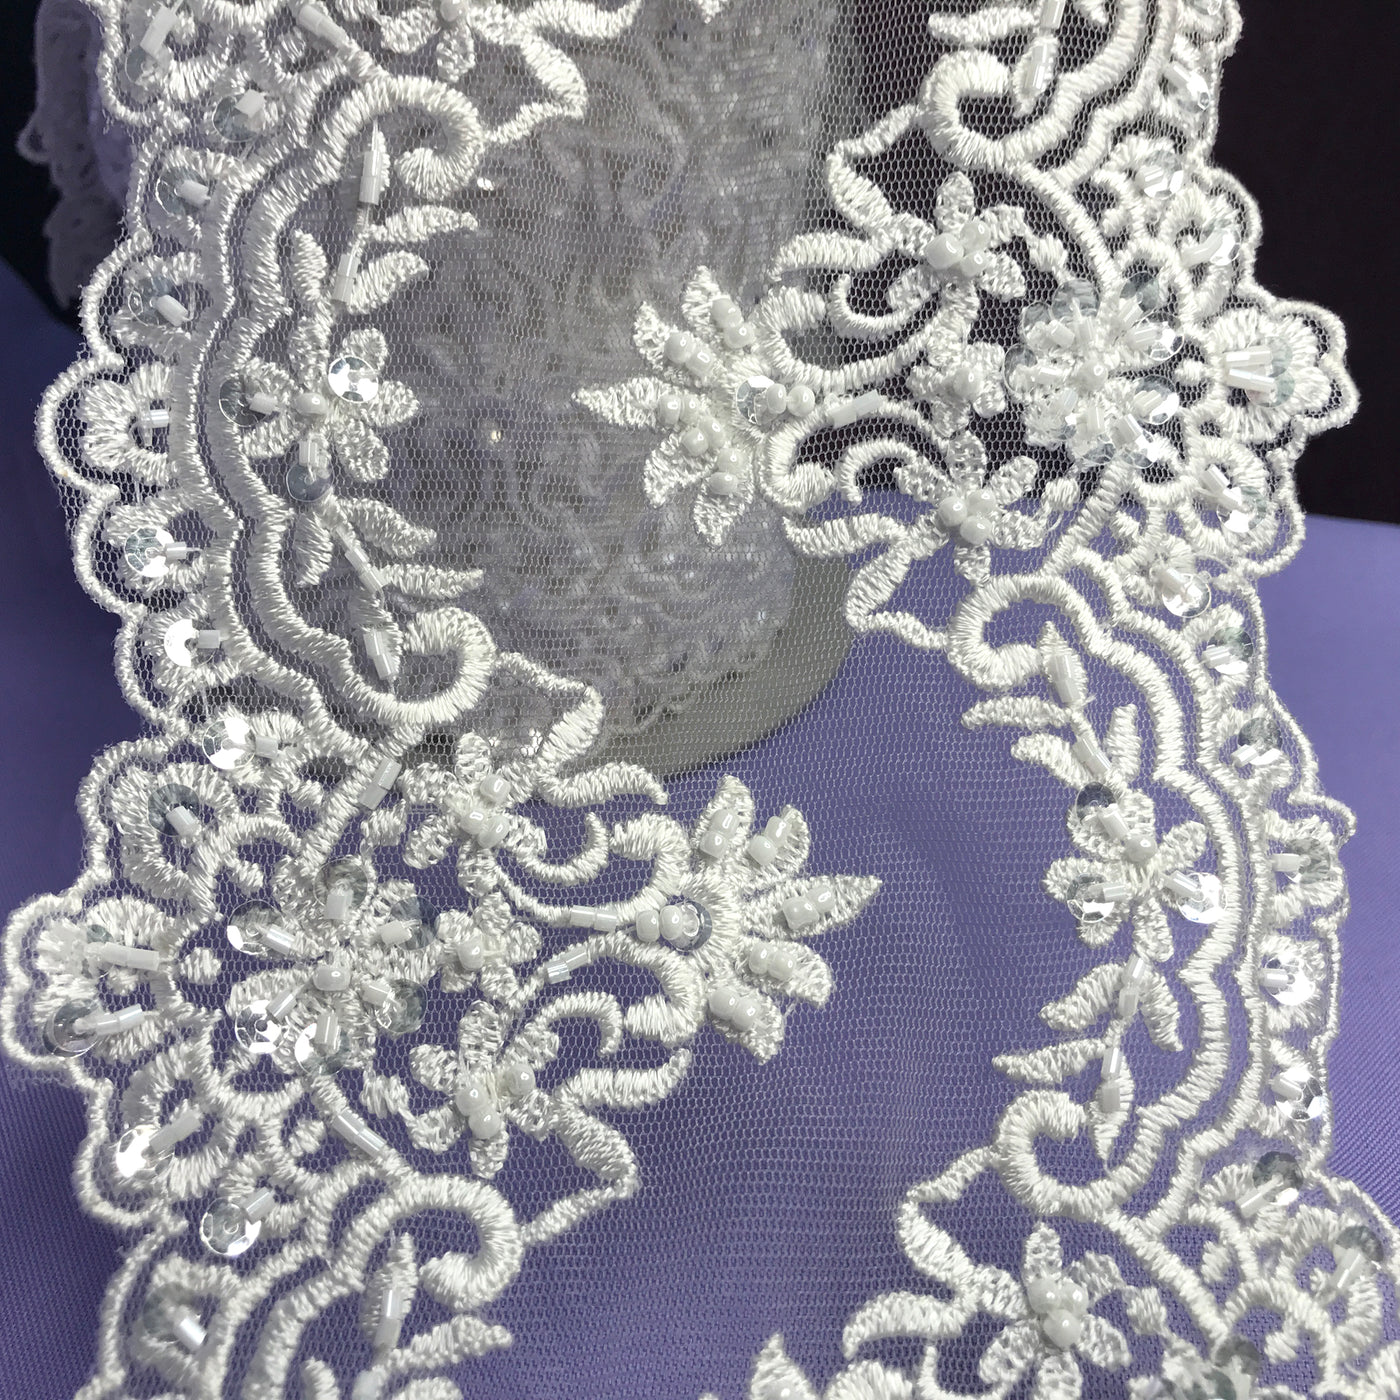 Double Sided Beaded White Trimming, Embroidered on 100 % Polyester Net Mesh.  Sold by the Yard.  Lace Usa